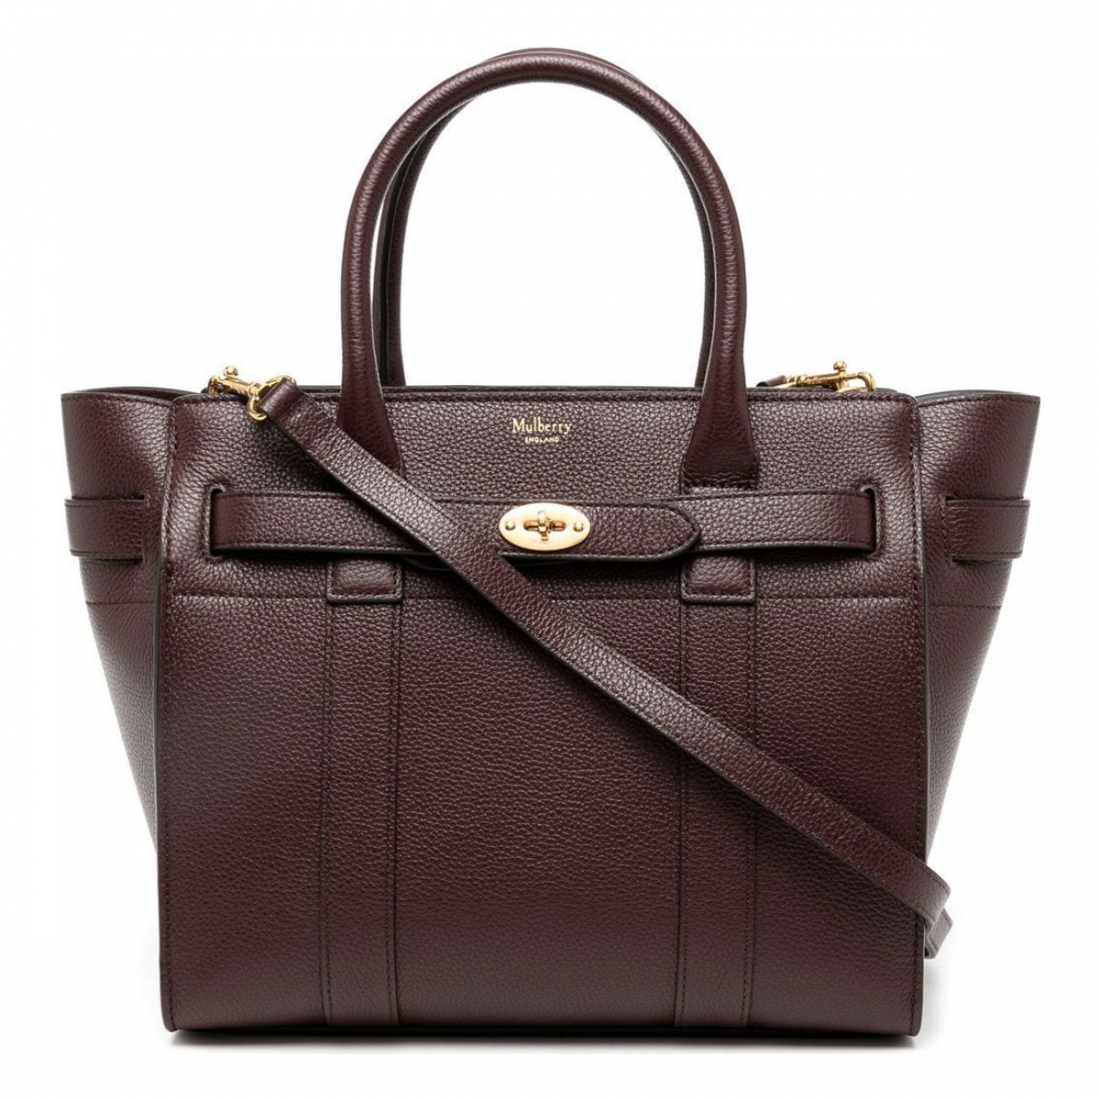 Women's 'Small Bayswater' Tote Bag